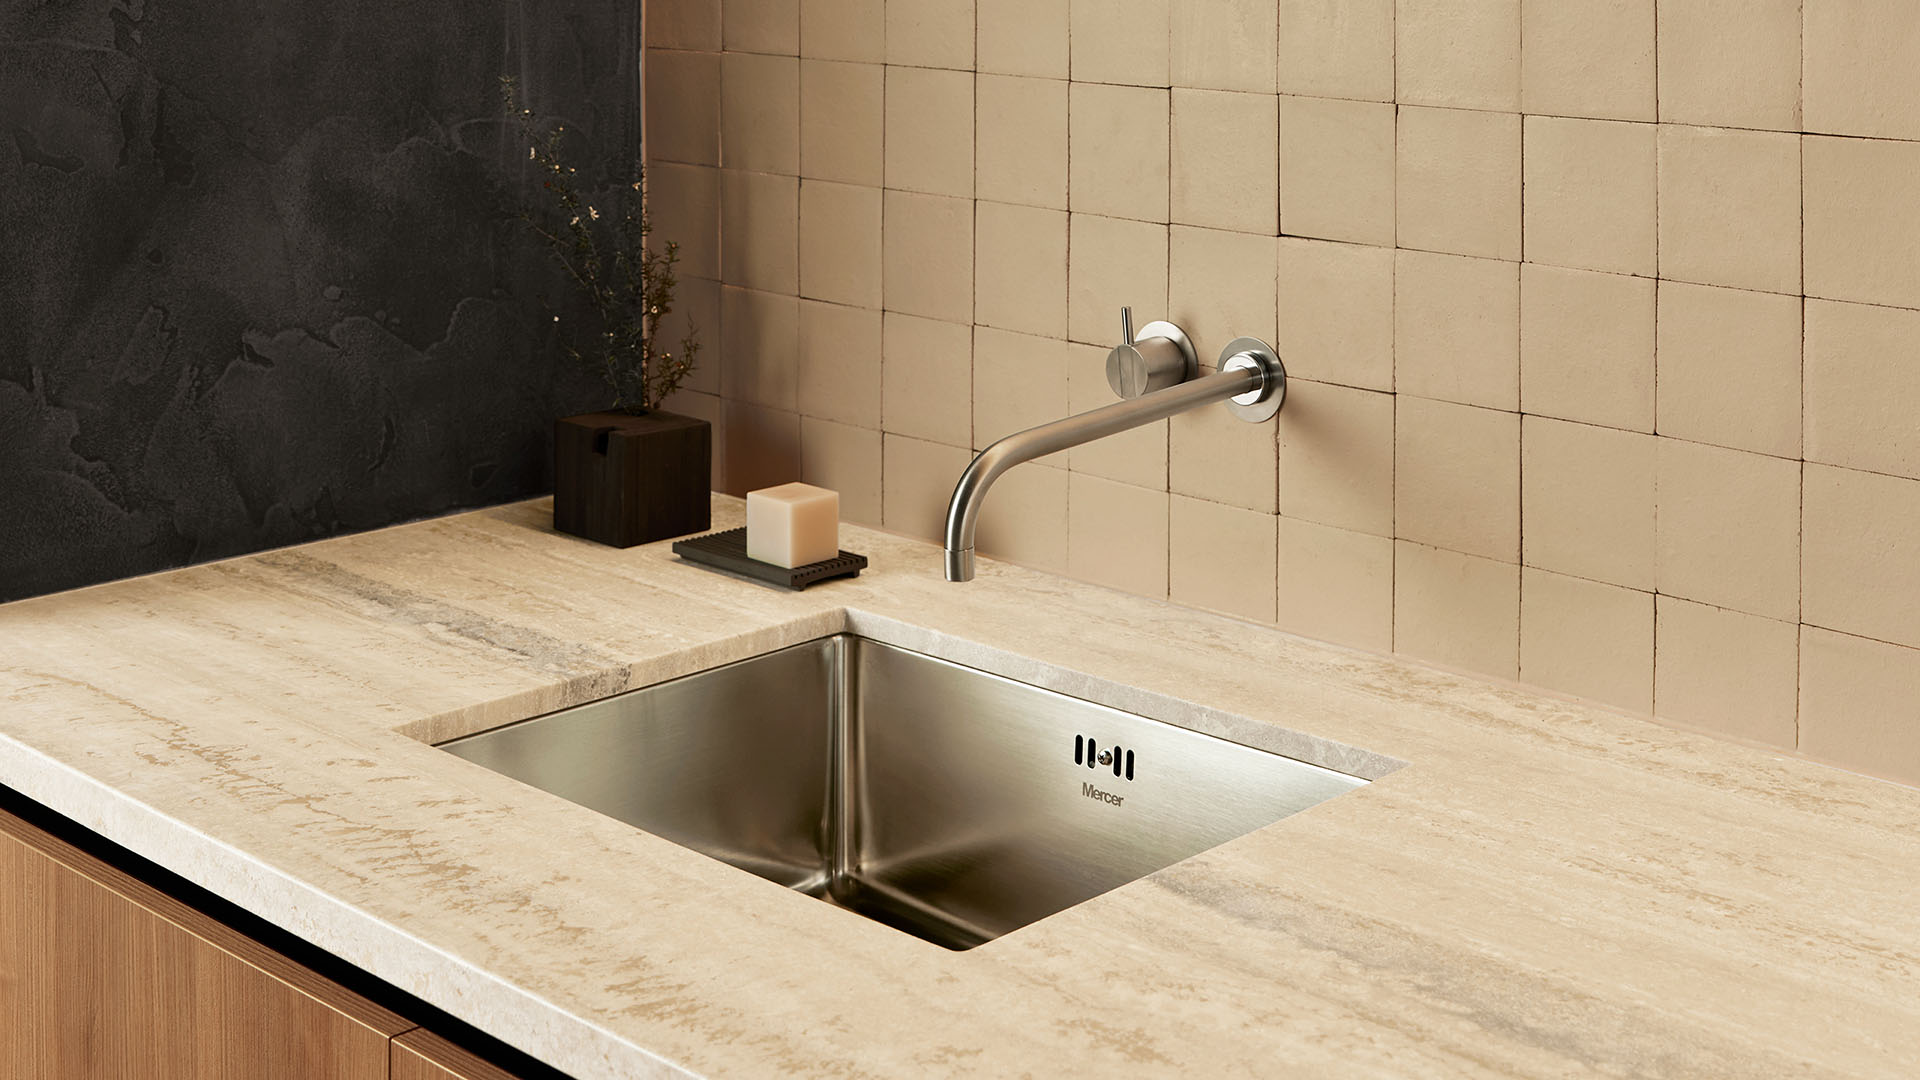 Shot of the Laundry's high-grade aluminum sink